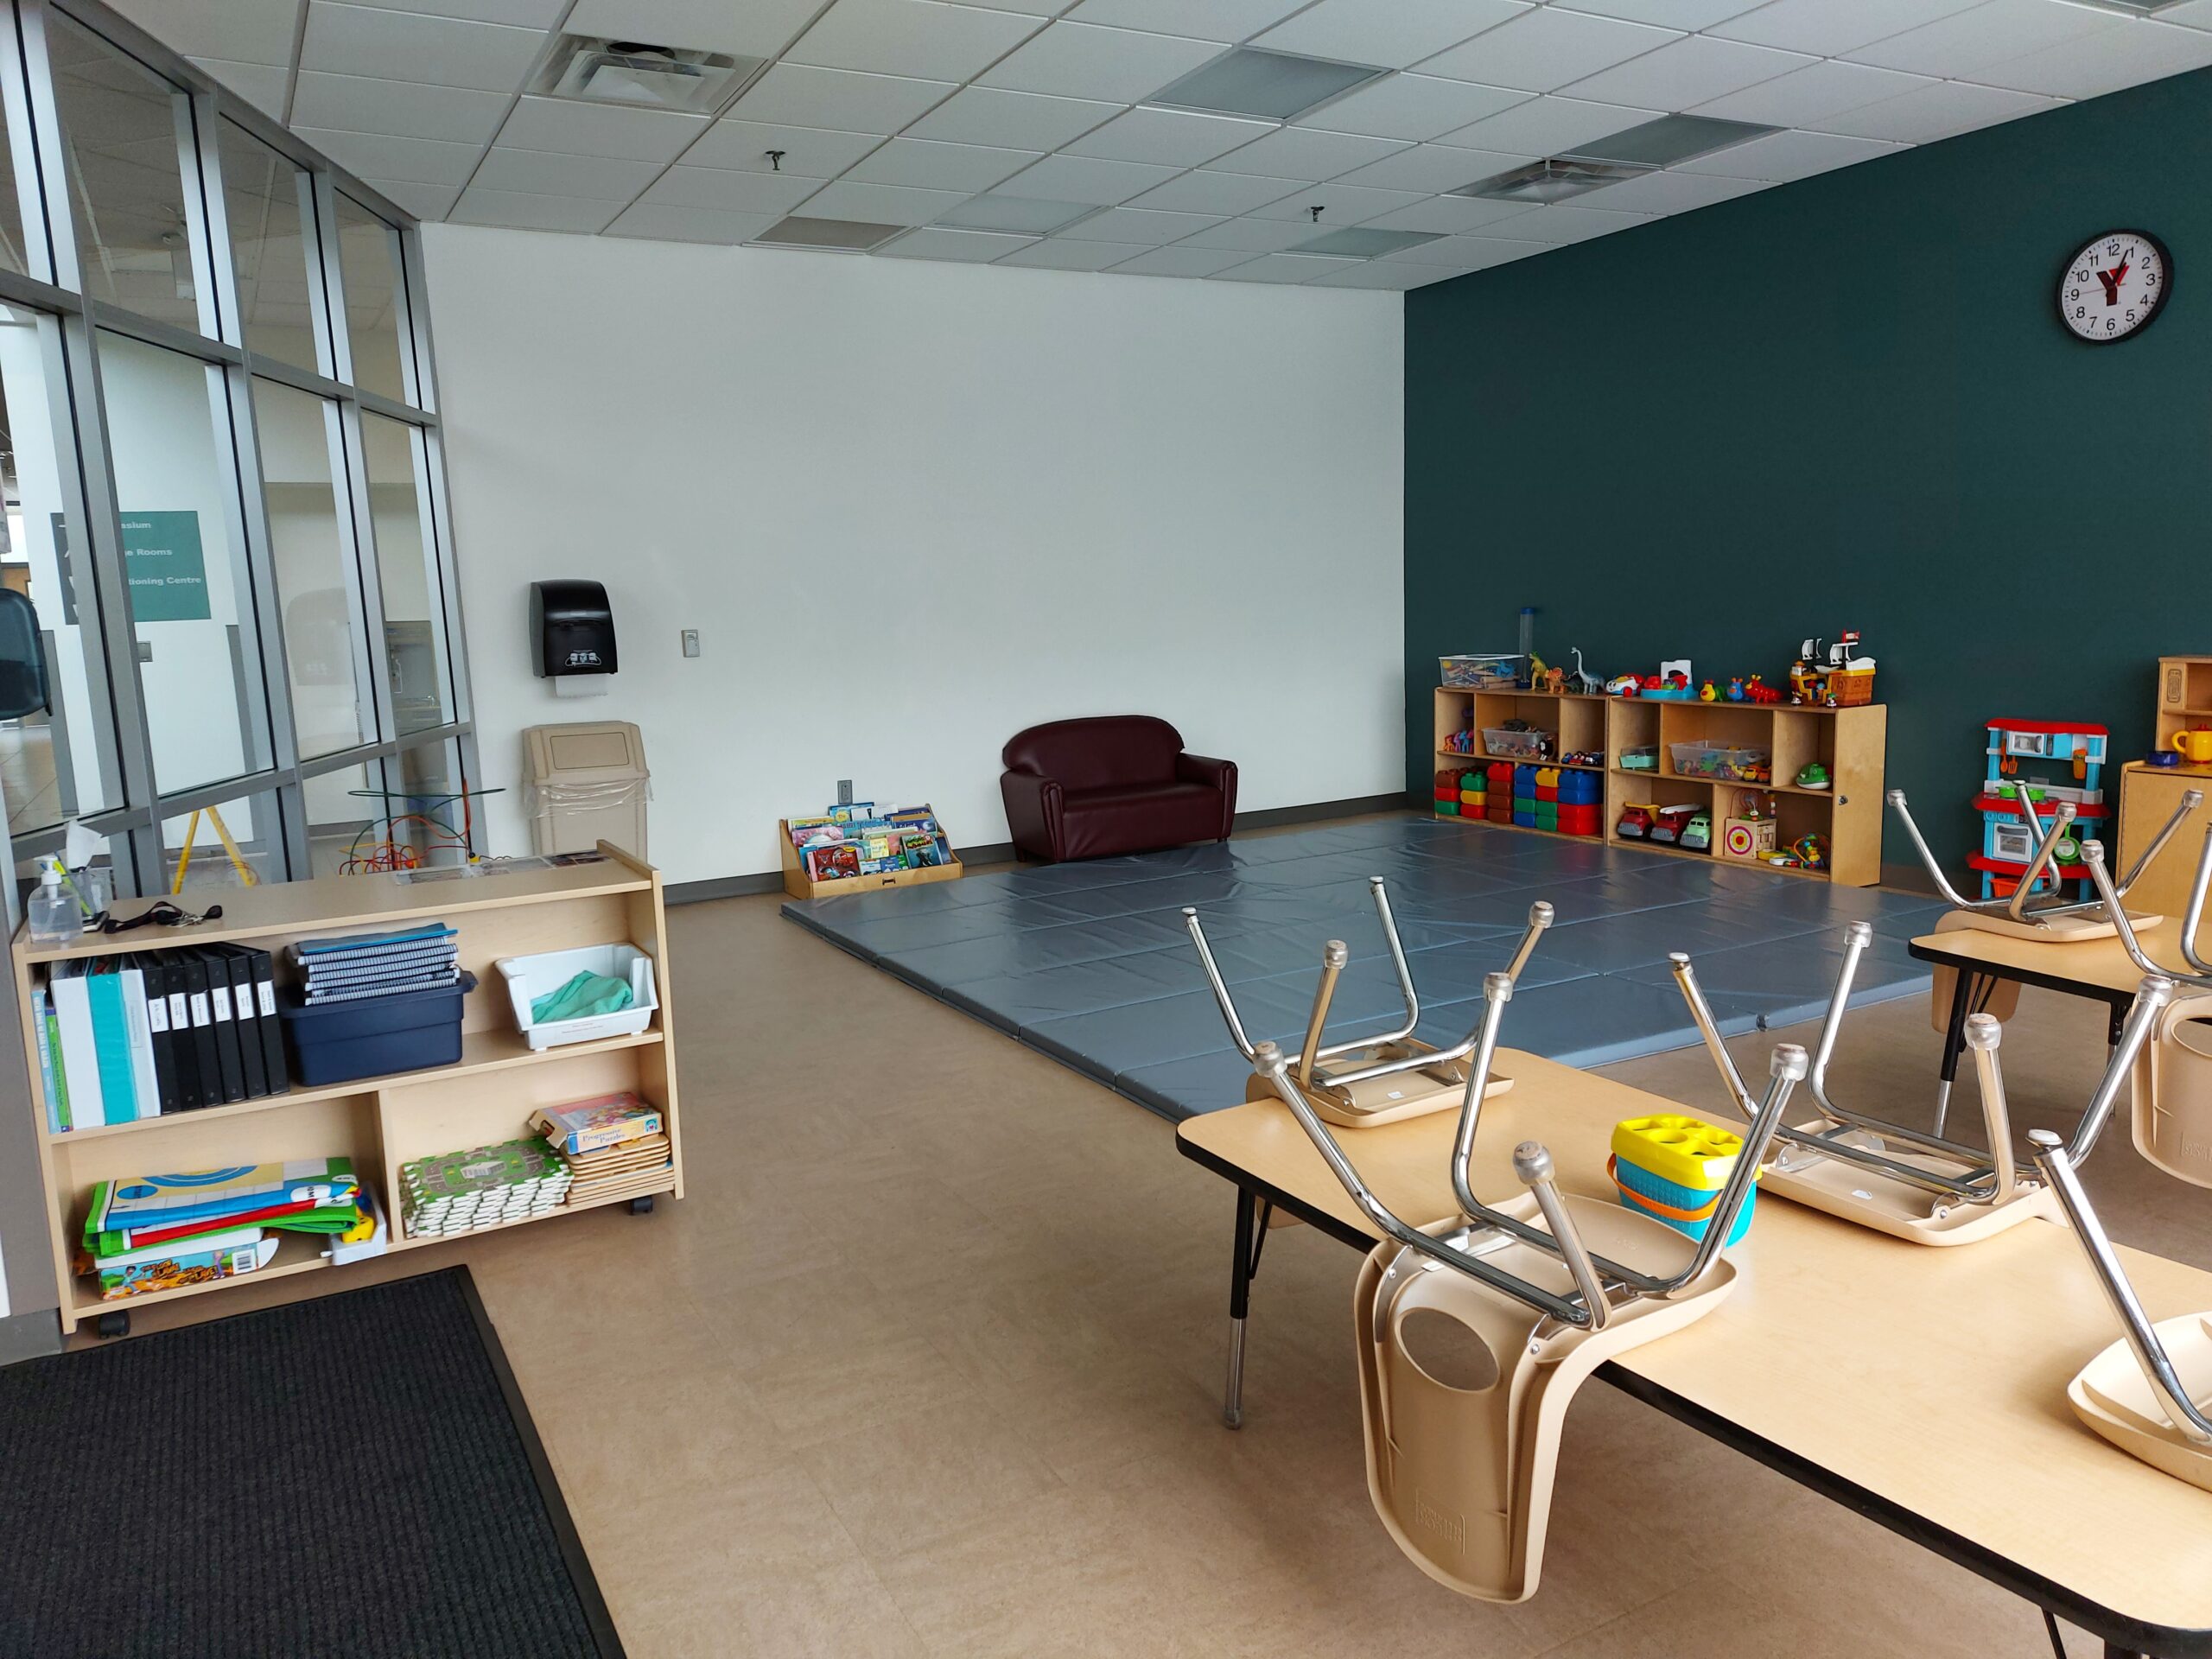 a wide angle view of a rental room at the YMCA with children's tables and toys